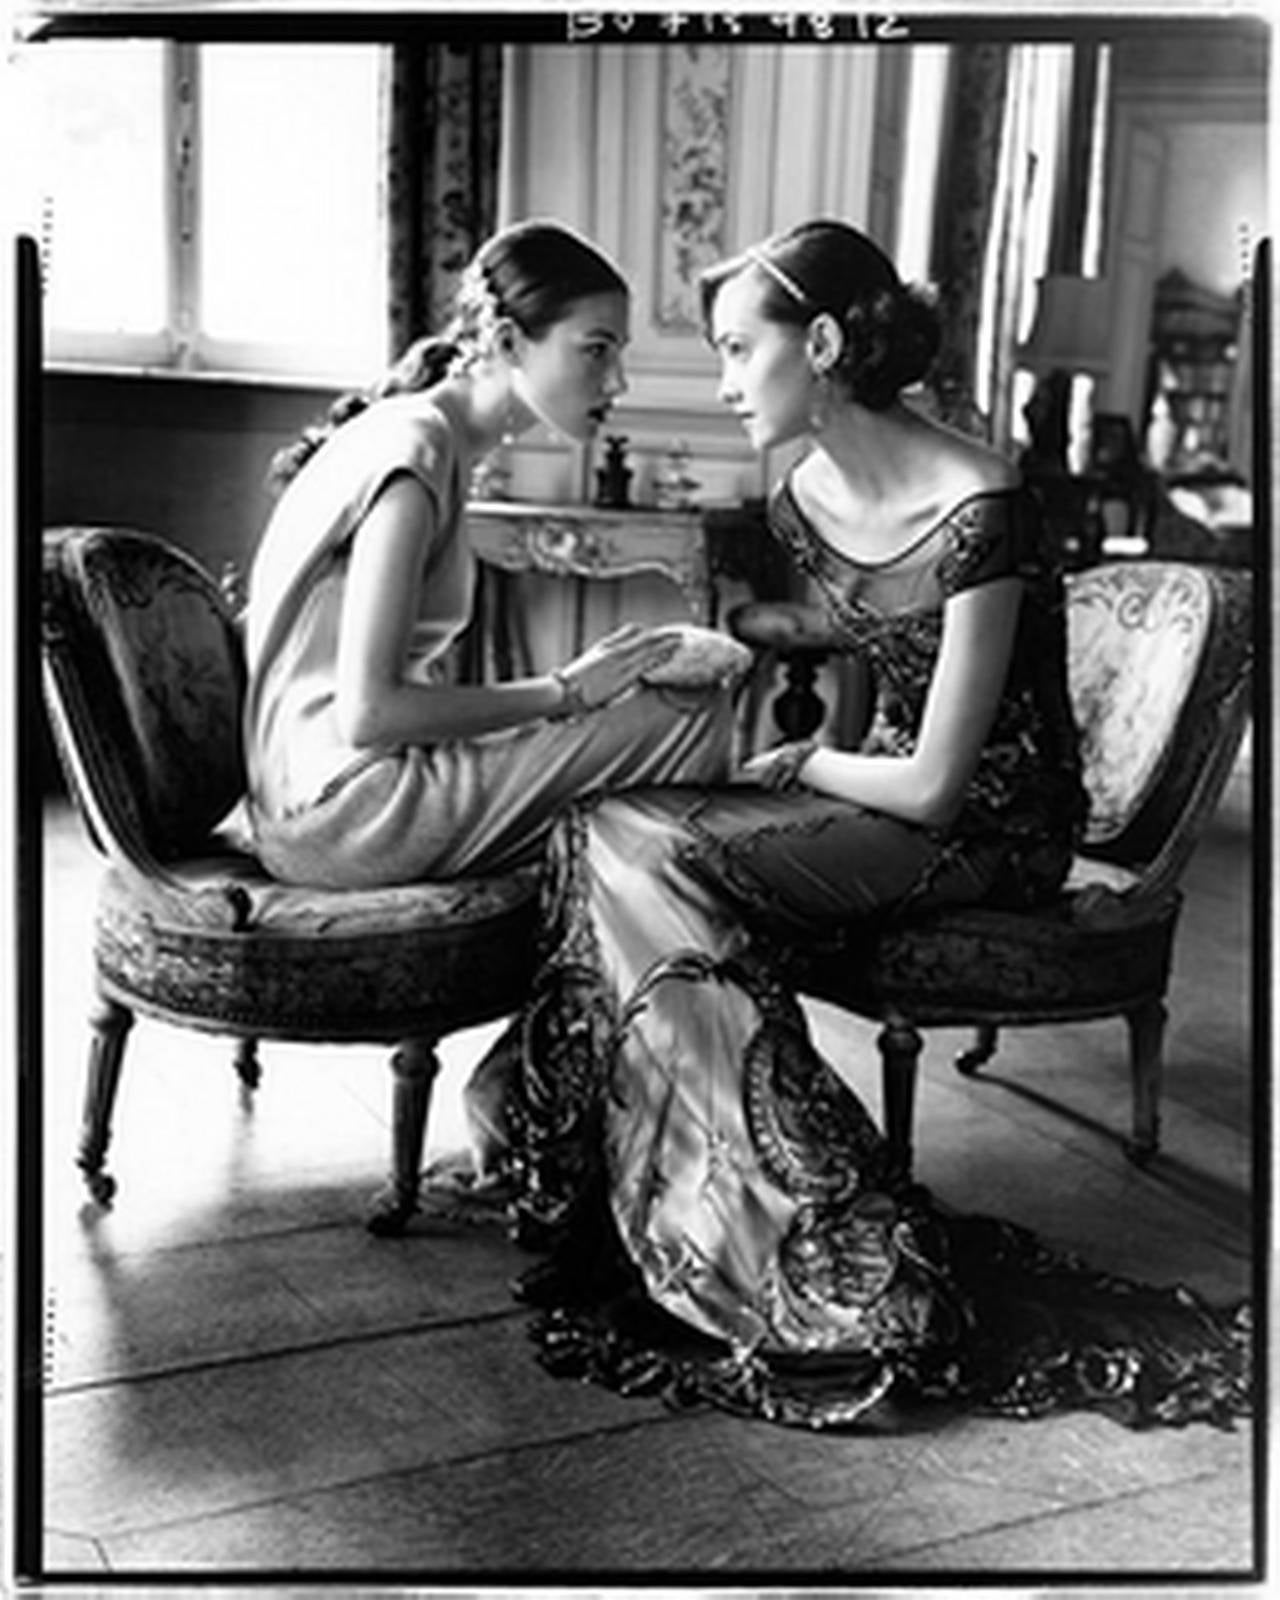 Arthur Elgort Black and White Photograph - Haylynn and Lida - Models sitting in Baroque interior, fine art photography 1998